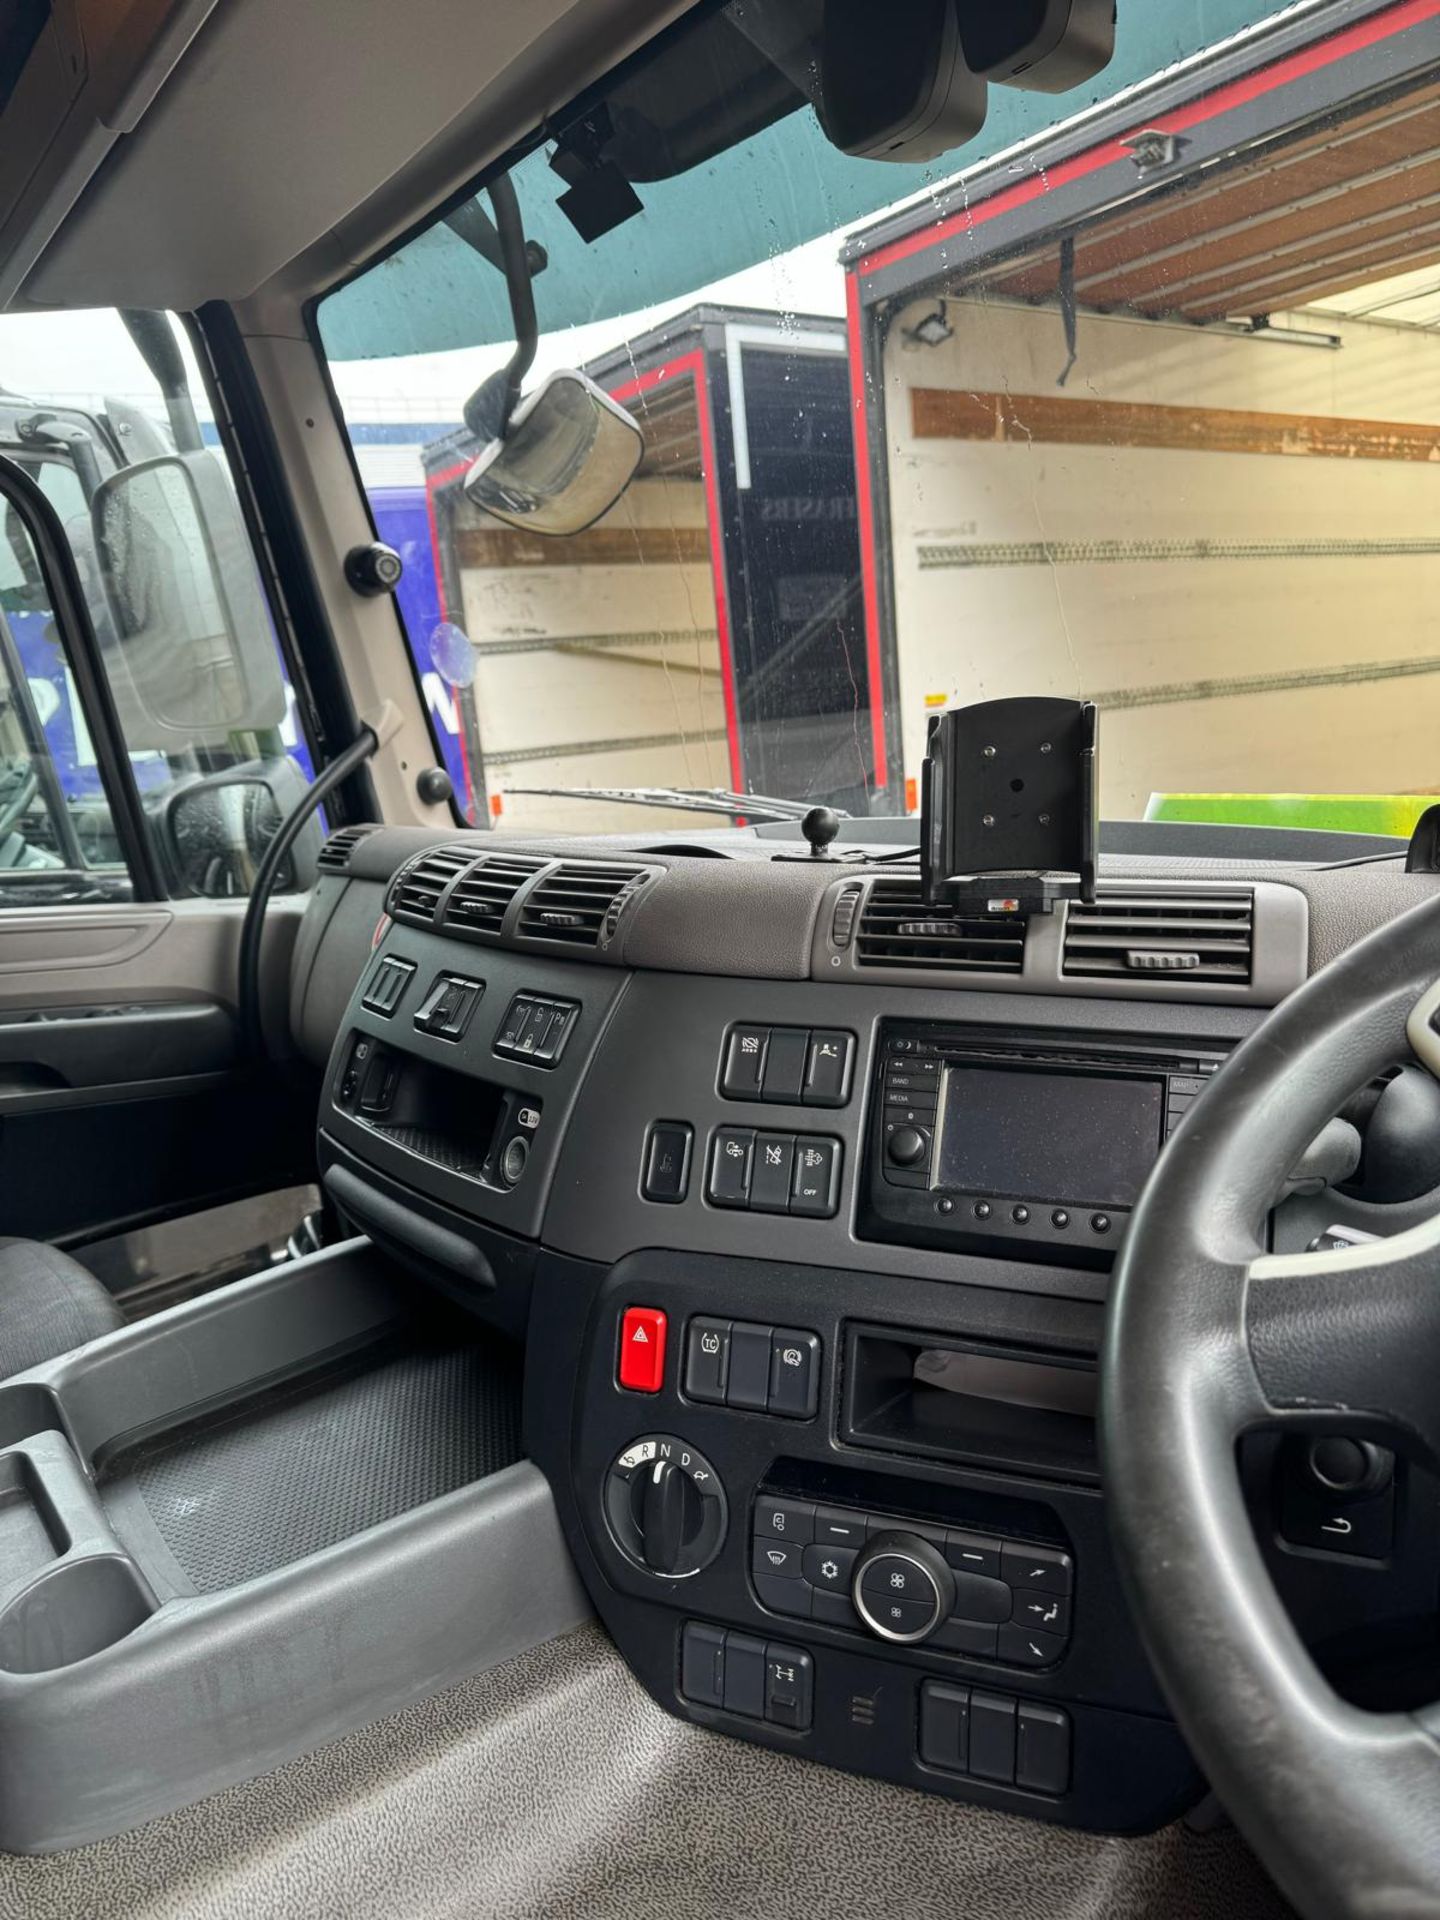 2019, DAF CF 260 FA (Ex-Fleet Owned & Maintained) - FN69 AXD (18 Ton Rigid Truck with Tail Lift) - Bild 11 aus 11